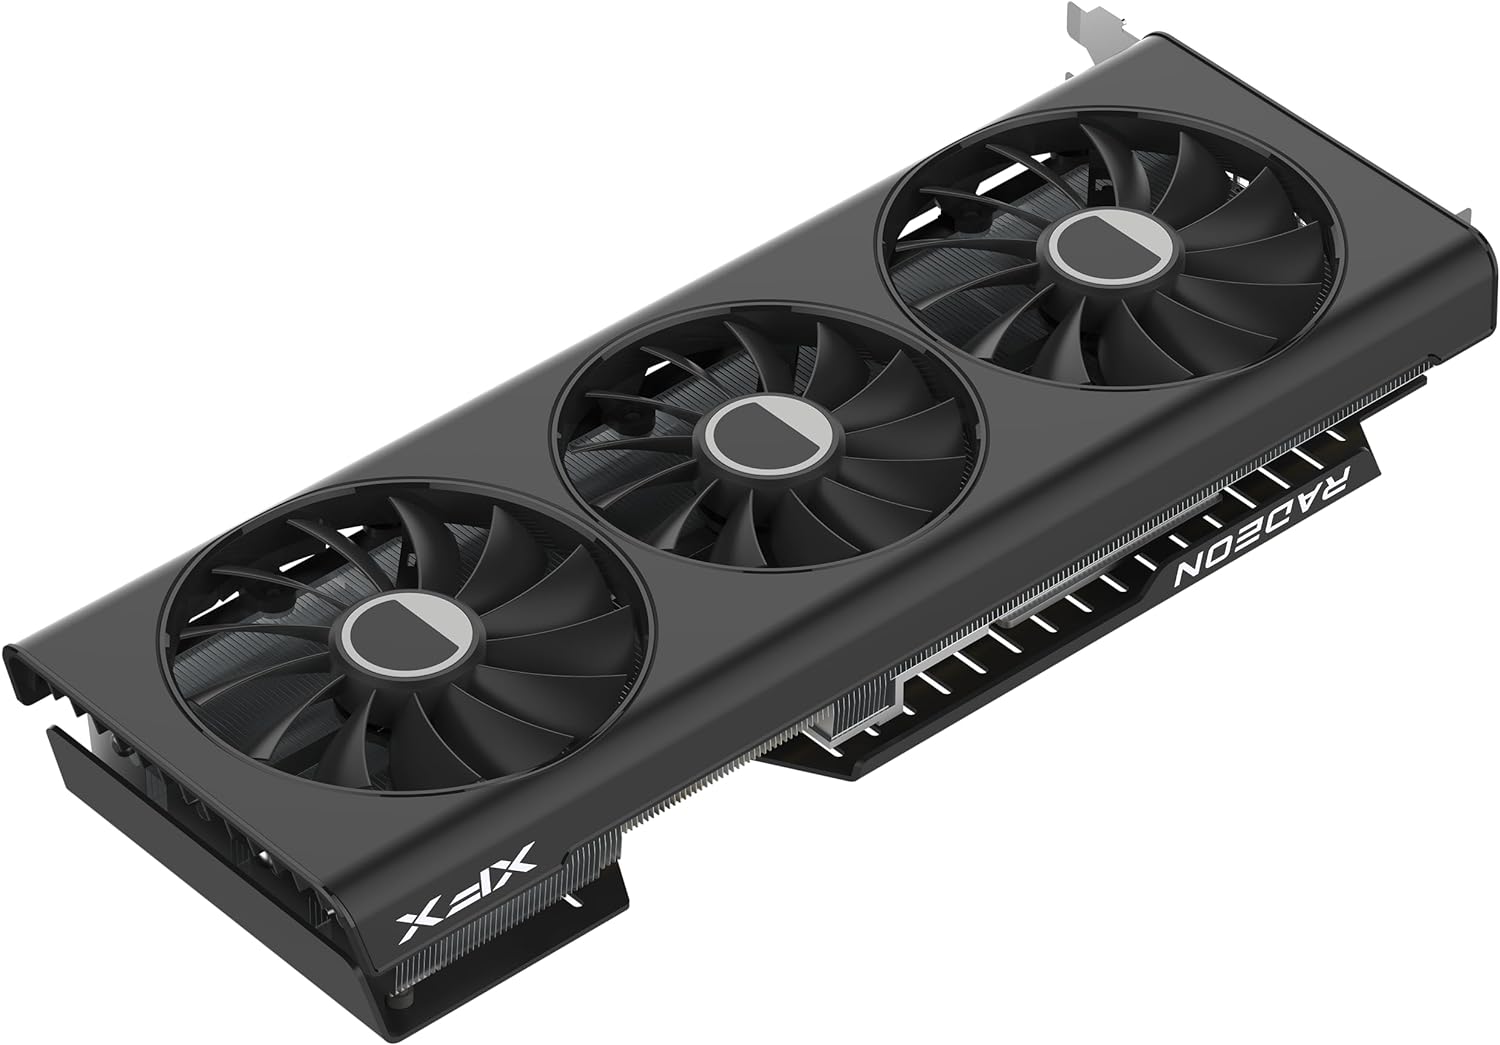 XFX Speedster Swft 319 AMD Radeon Rx 6900 Xt Core Gaming Graphics Card With 16Gb Gddr6, AMD Rdnaâ„¢ 2